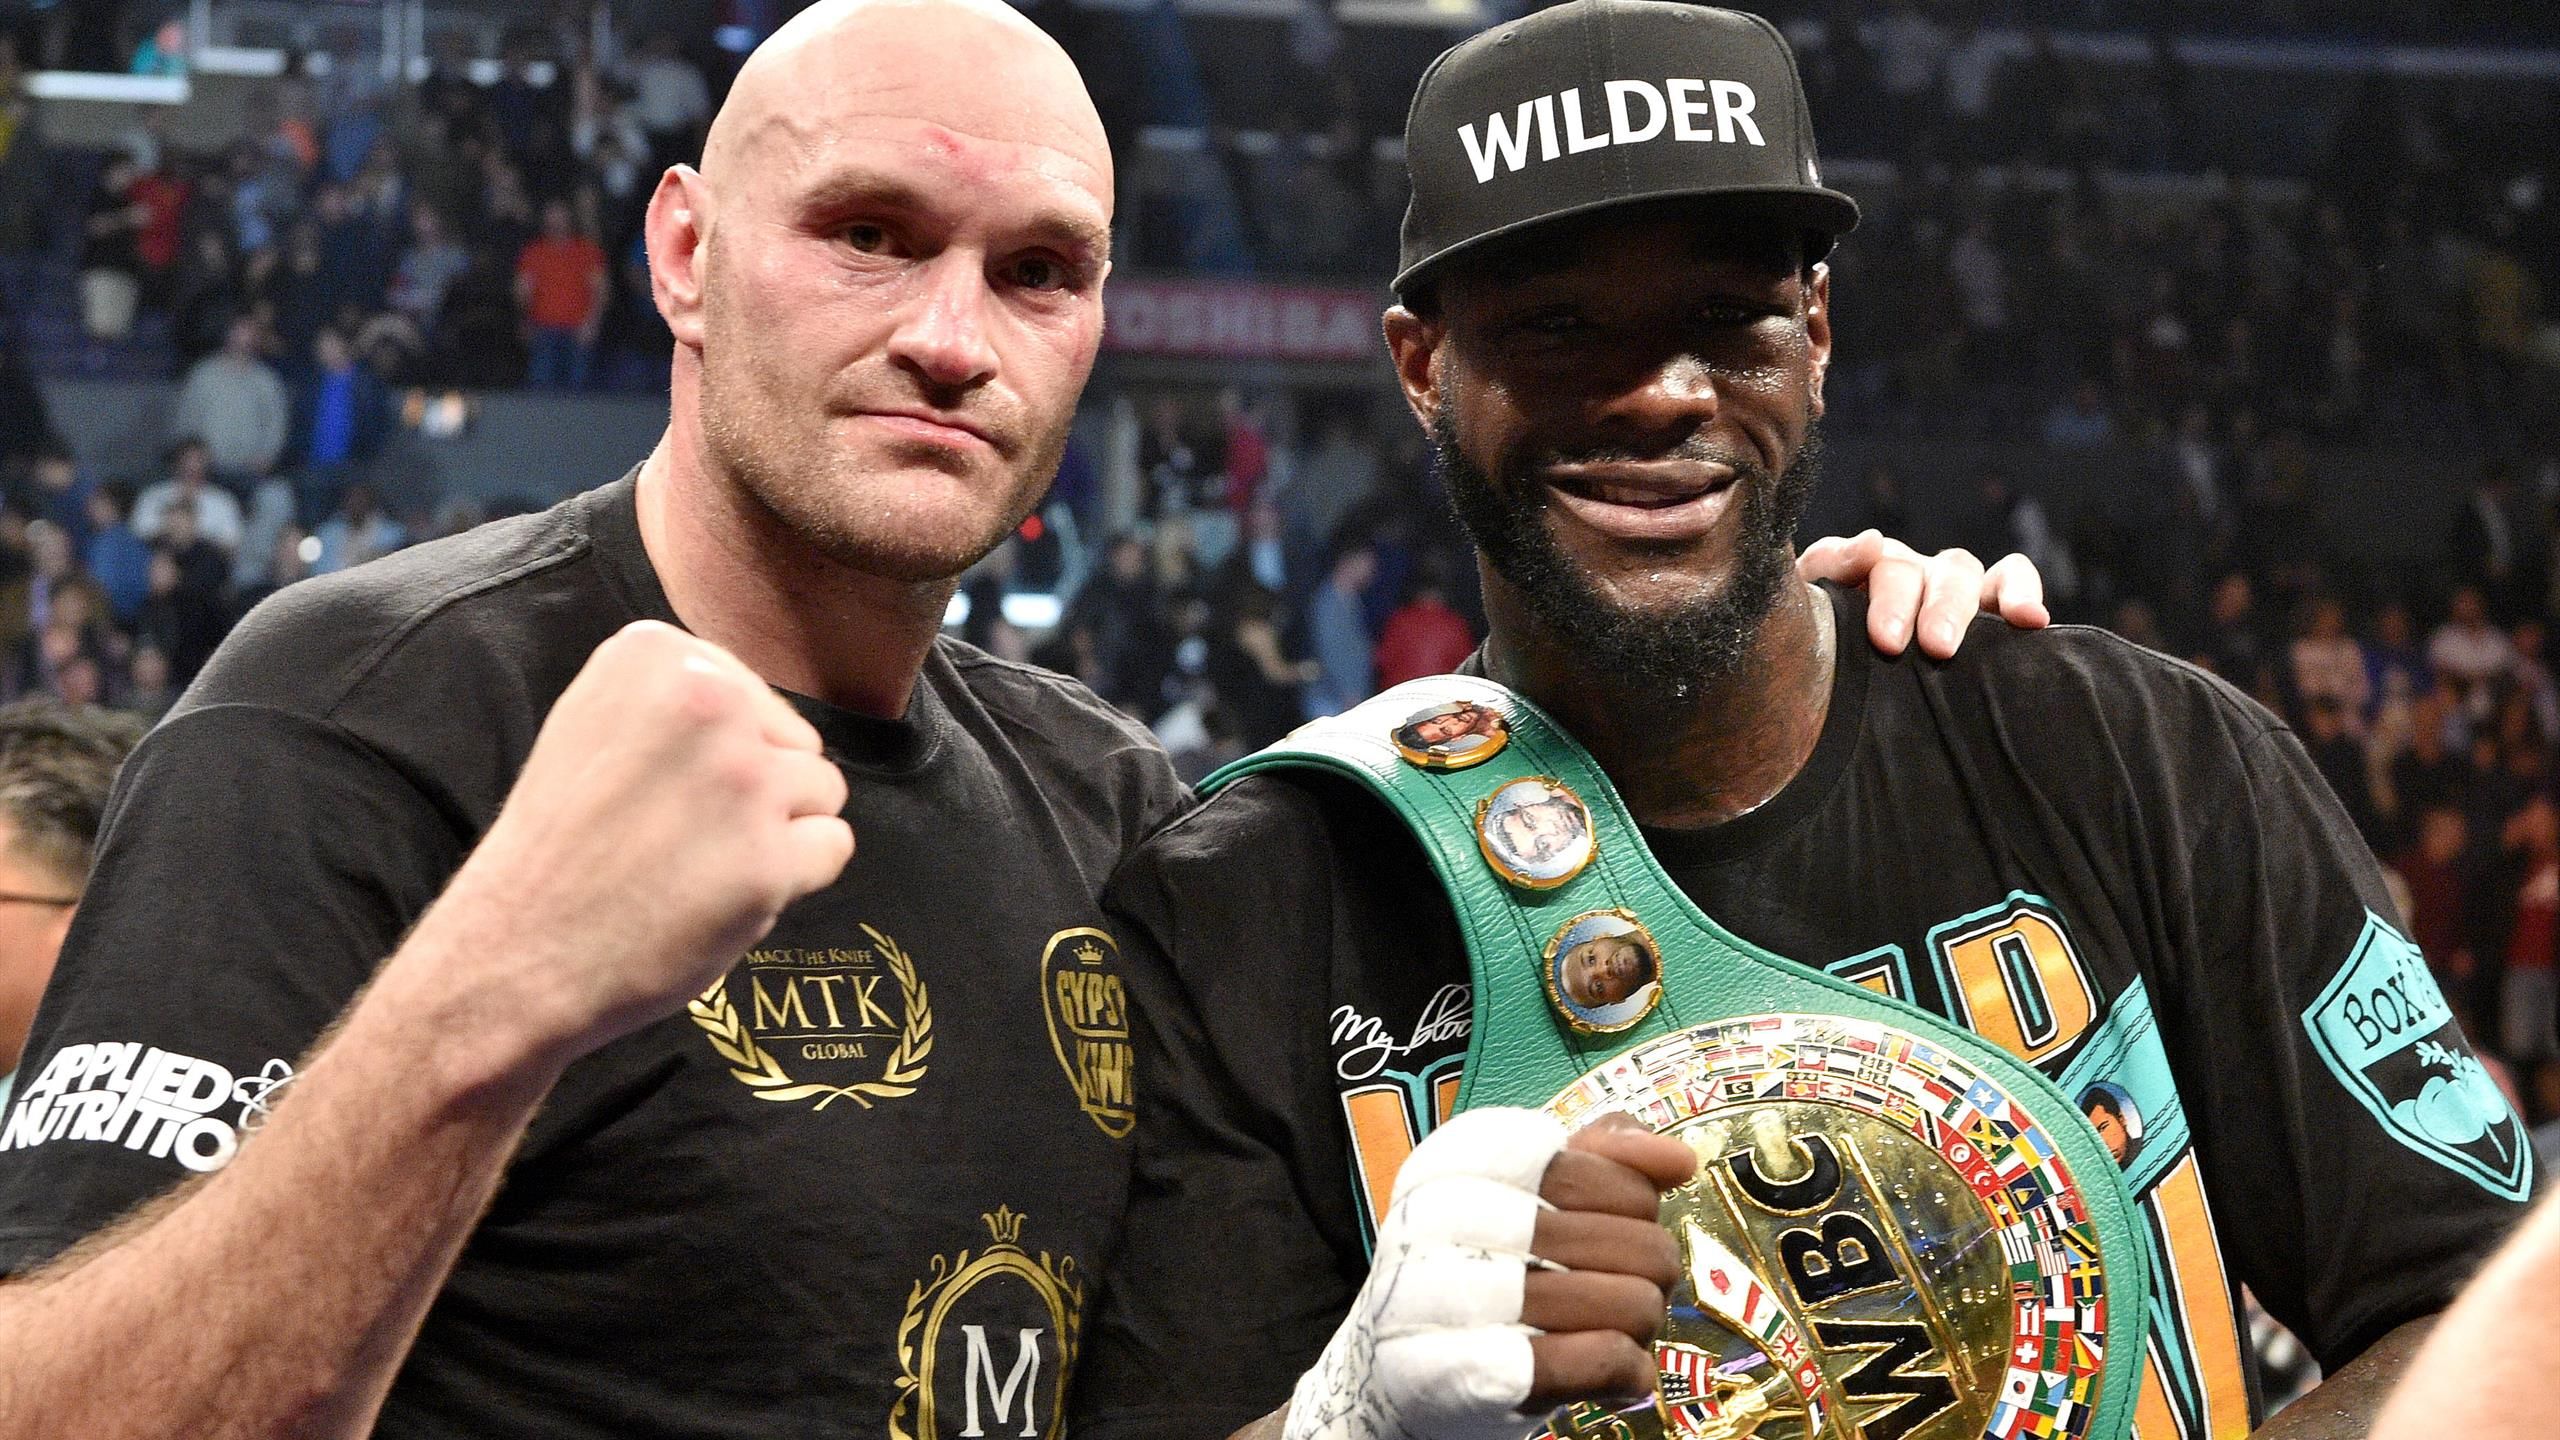 STATUS OF THE WBC HEAVYWEIGHT DIVISION - World Boxing Council